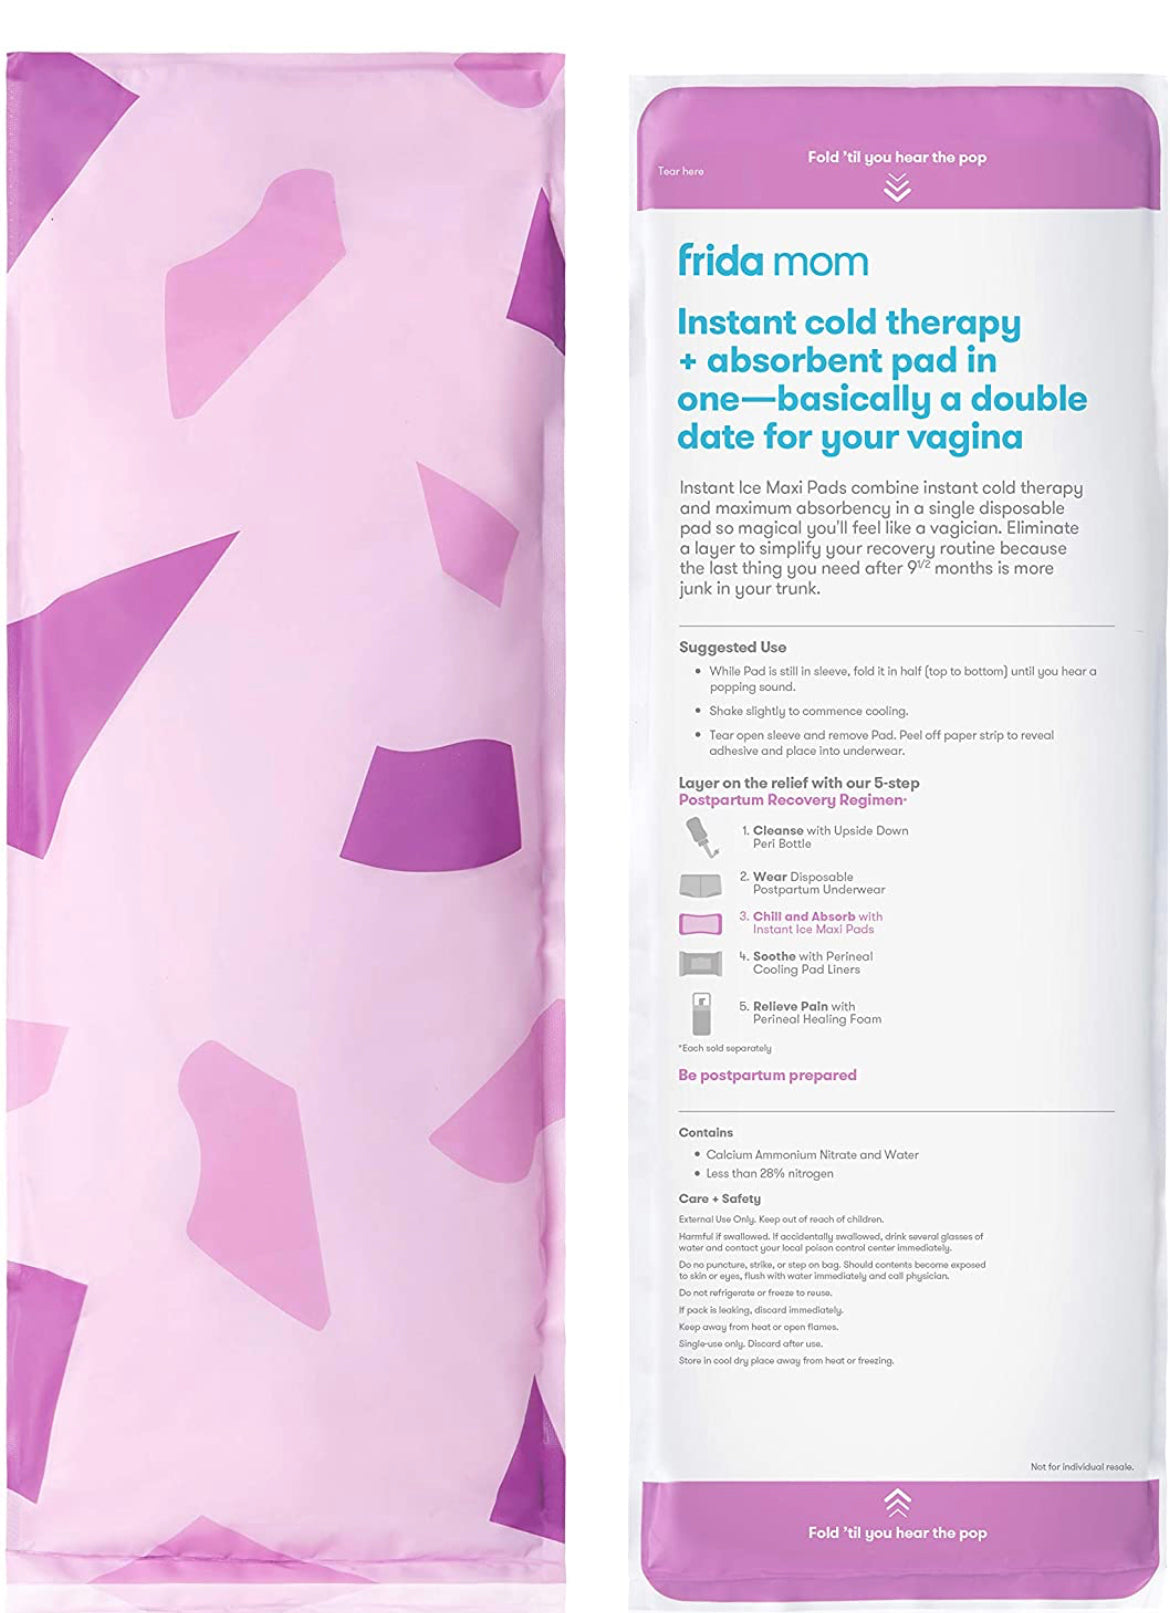 Frida Mom 2-in-1 Postpartum Absorbent Perineal Ice Maxi Pads.